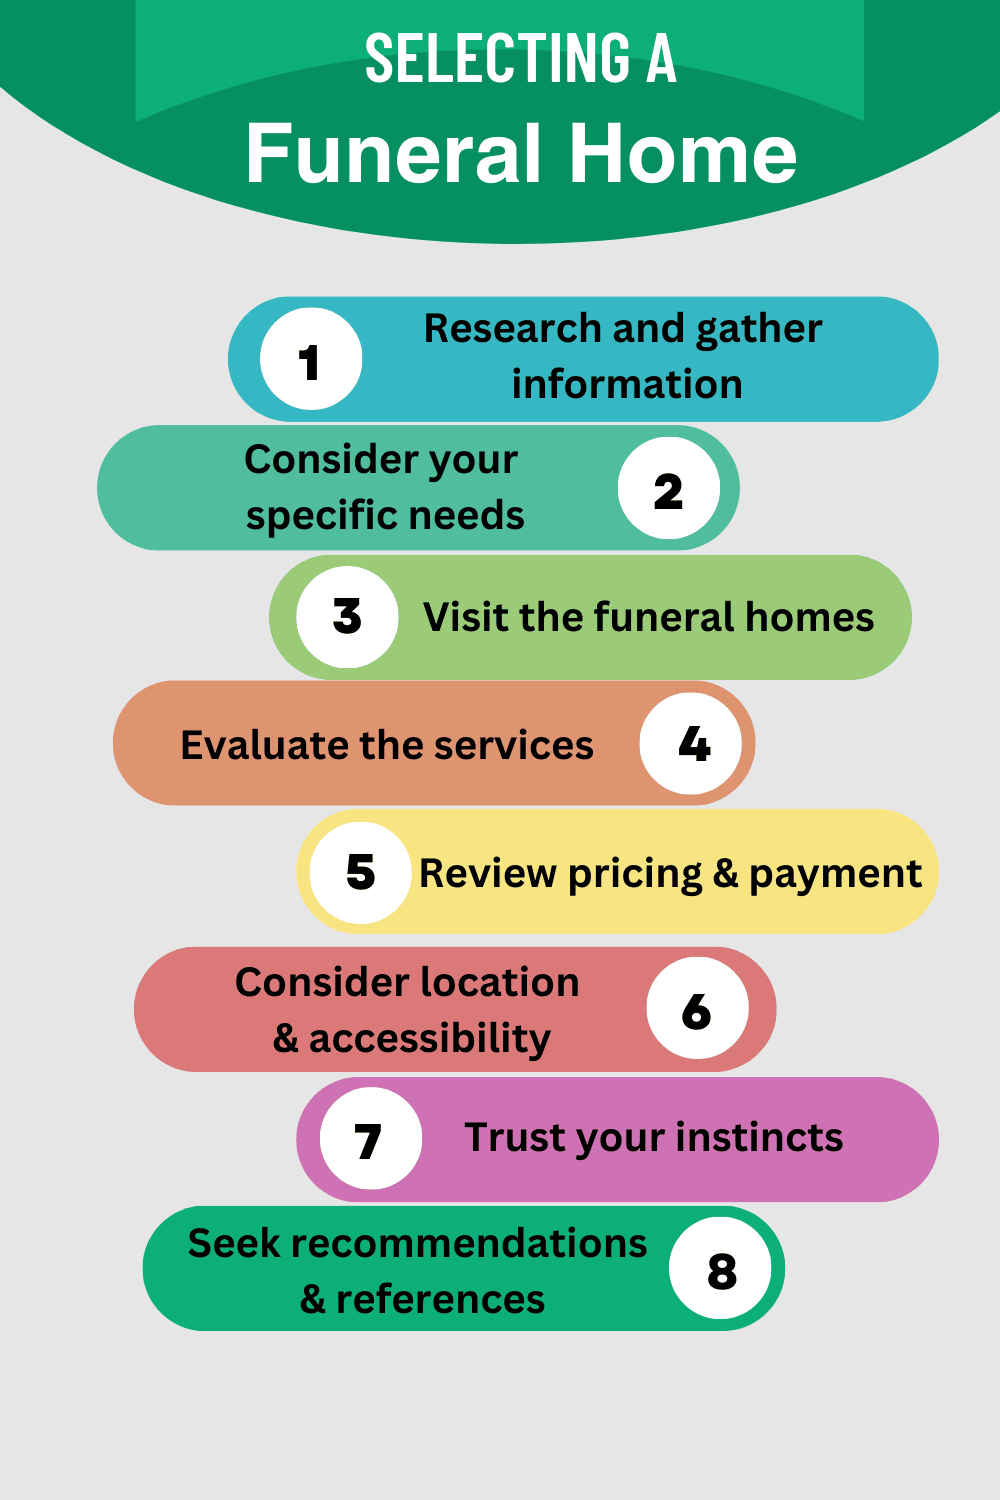 Selecting a Funeral Home